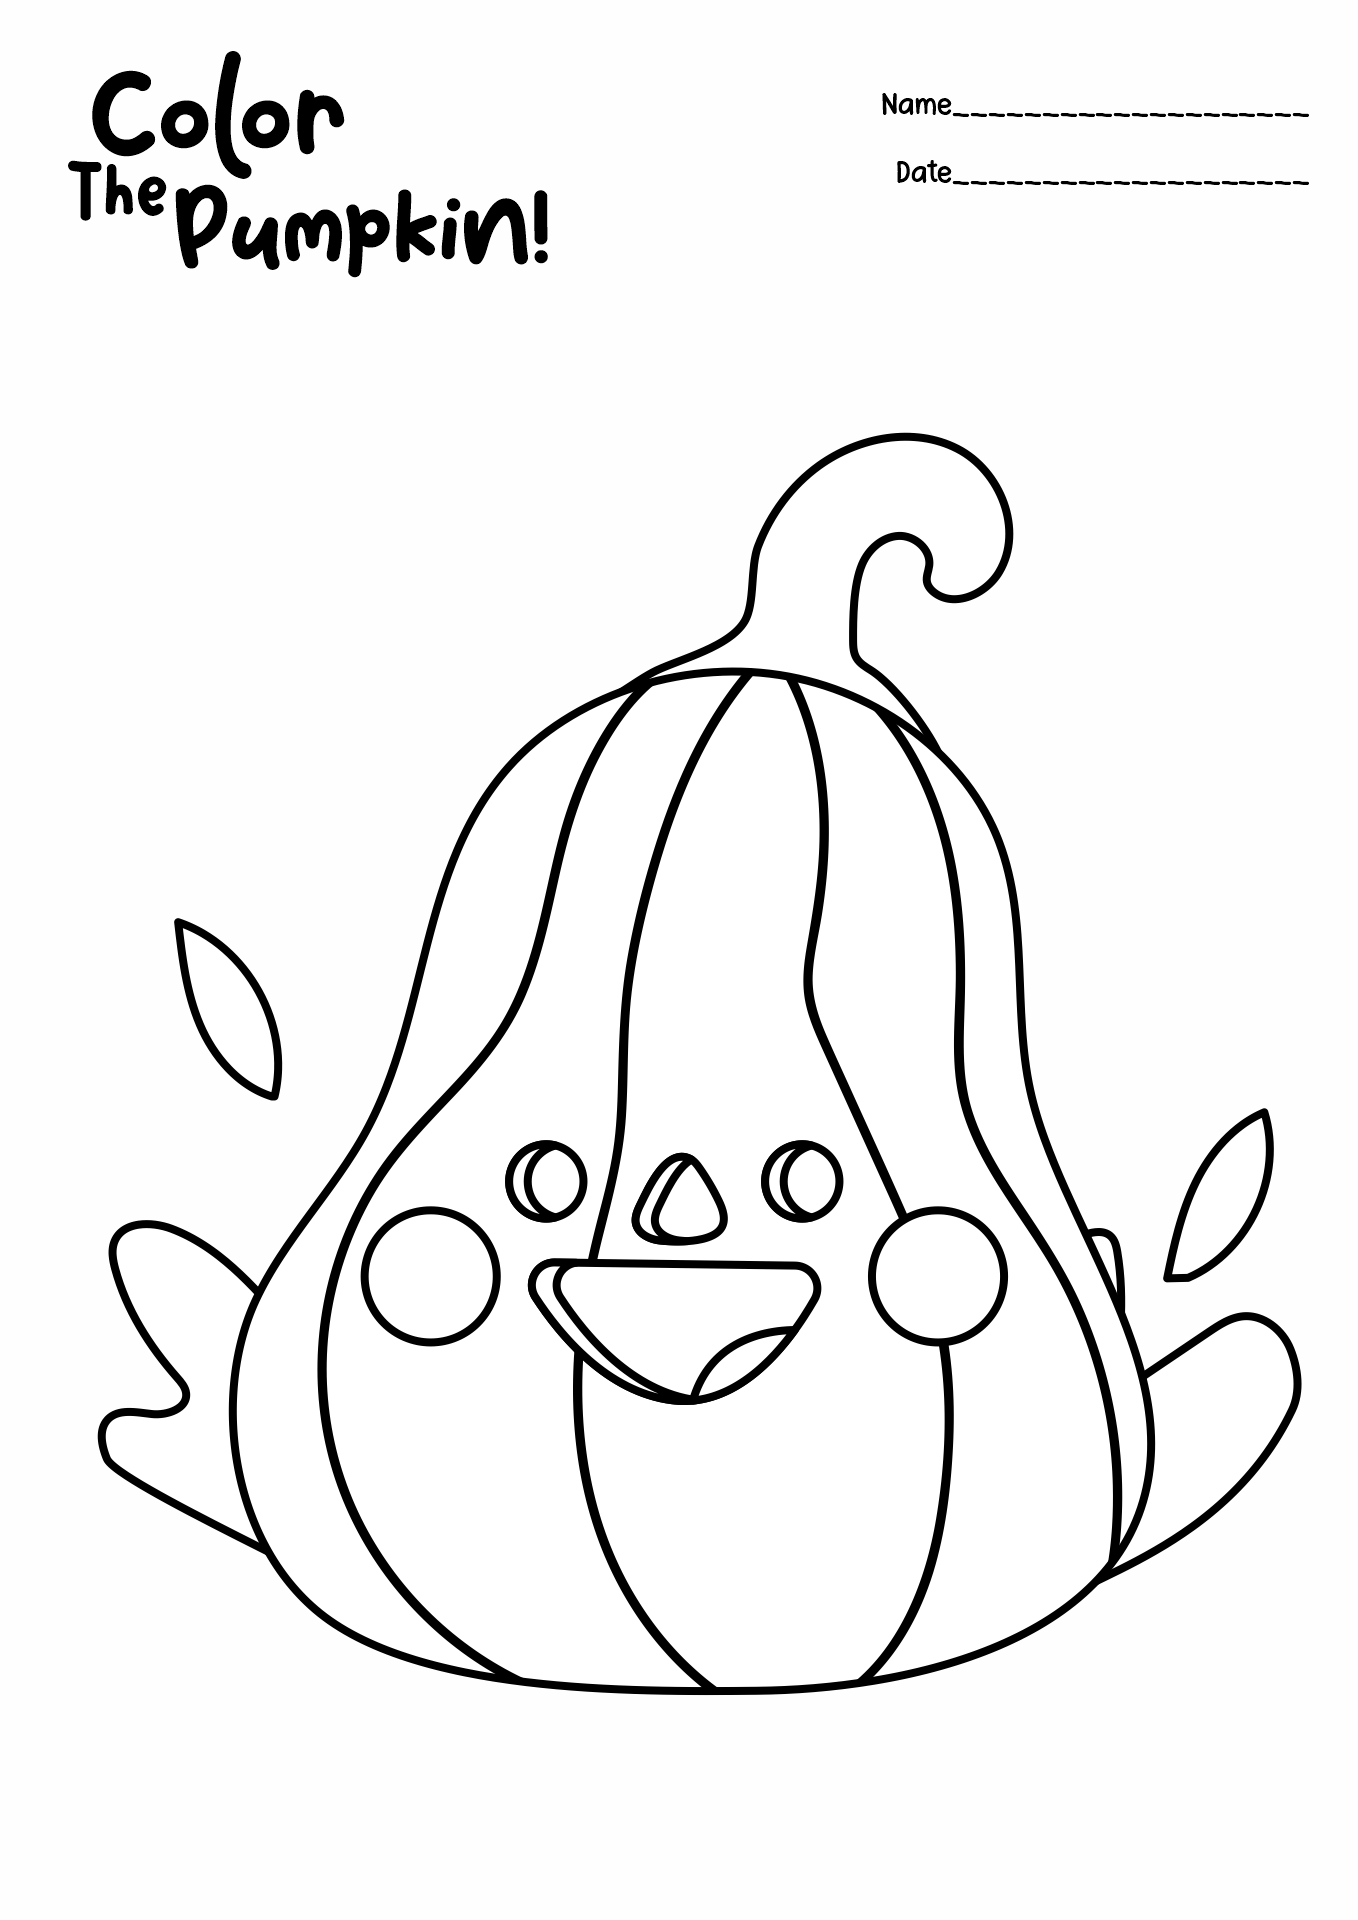 Halloween Pumpkin Coloring Pages Image